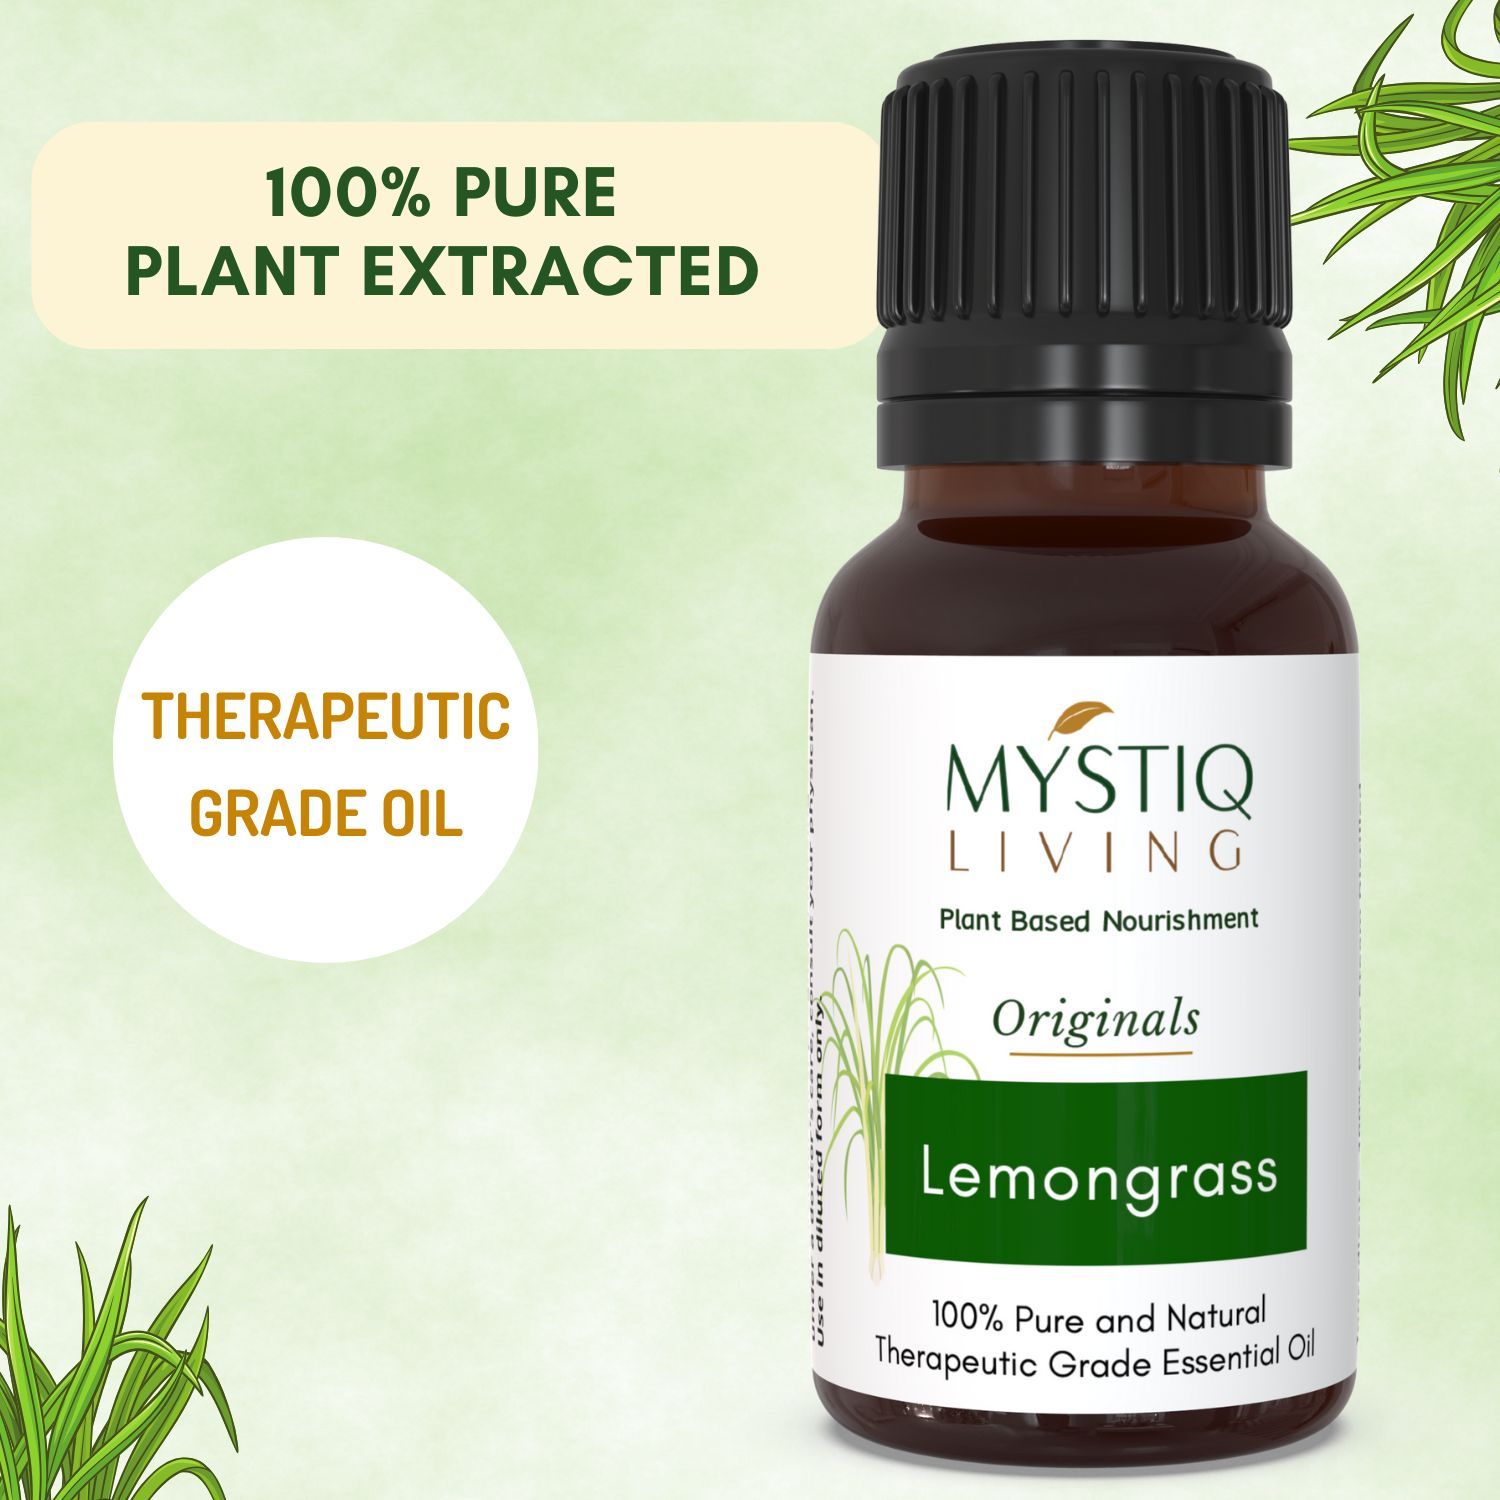 Buy Mystiq Living Originals - Lemongrass Essential Oil 100% Pure, Natural, Undiluted & Therapeutic Grade for Face, Nails, Hair, Skin, Natural Mosquito Repellent- 15ml - Purplle